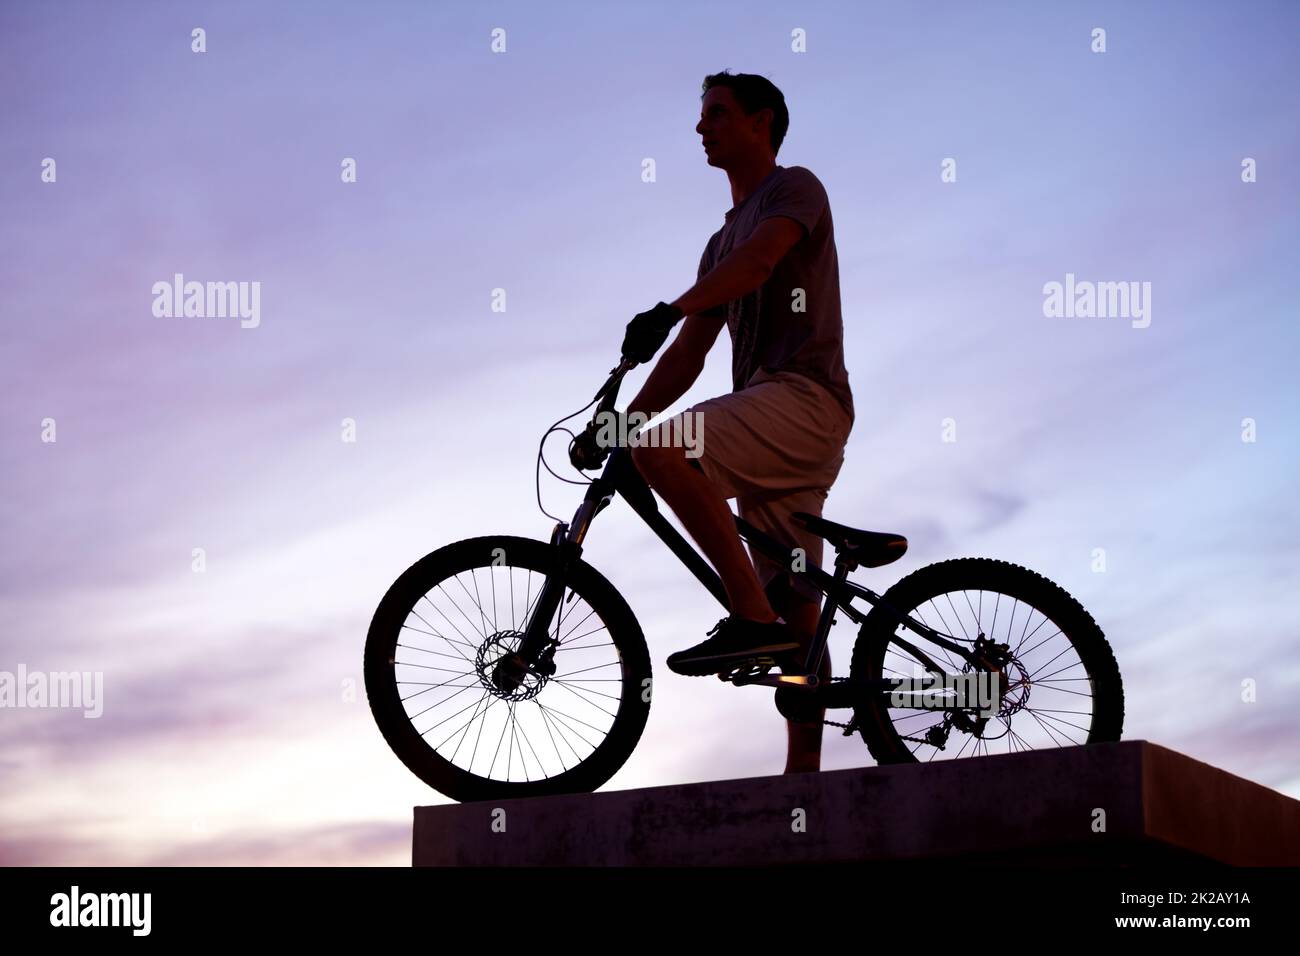 King of the city. Silhouette shot of a man riding his bike at dusk. Stock Photo